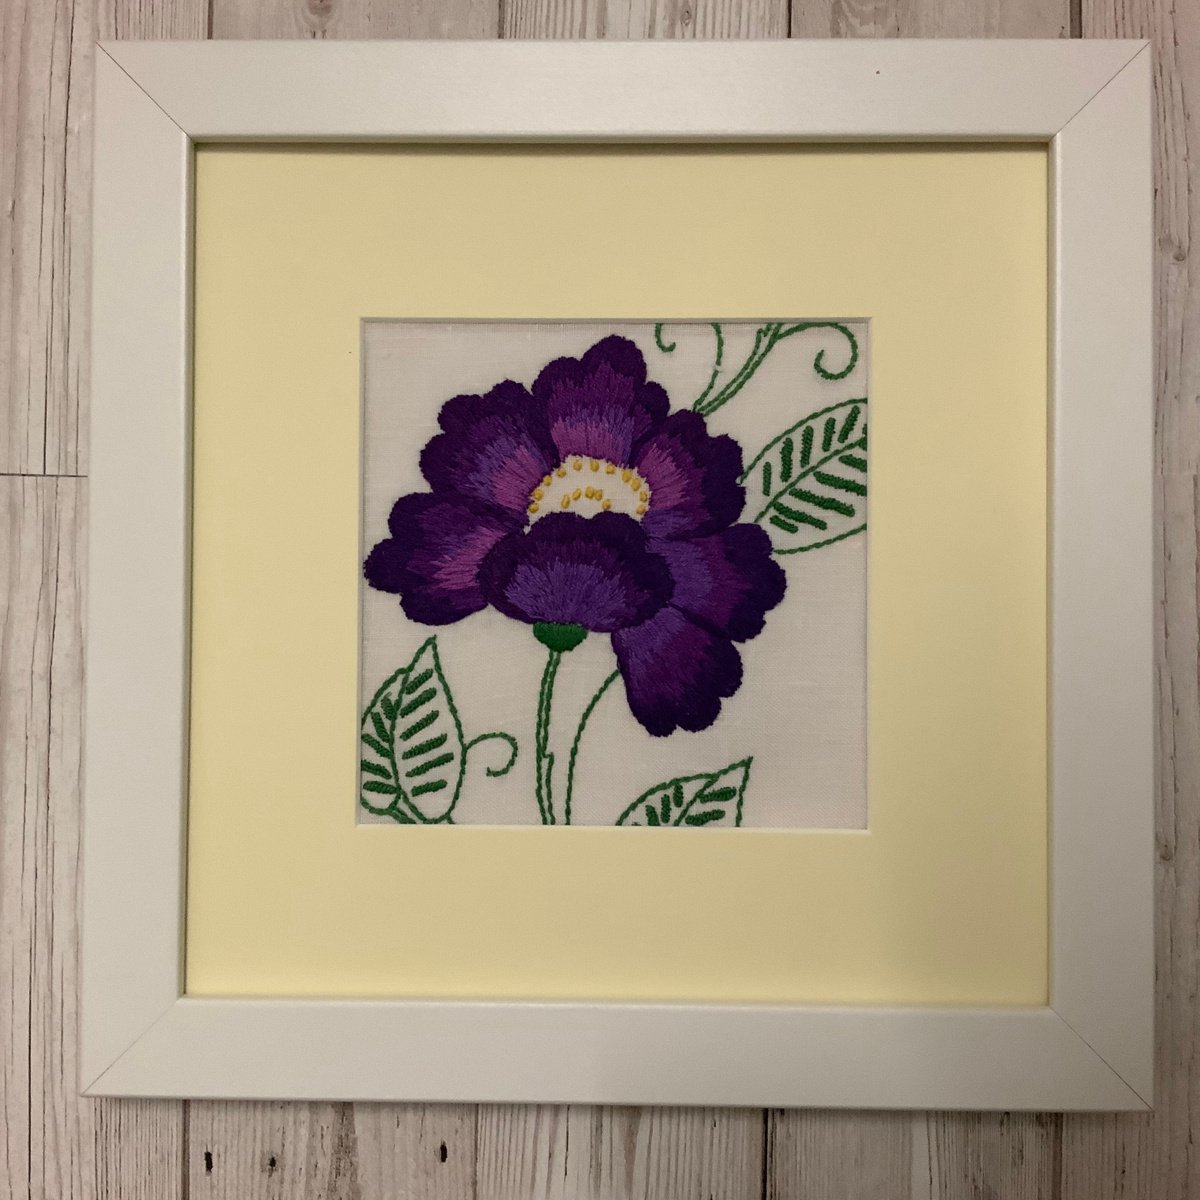 Anemone - Vintage 1930s embroidery - floral art by Sarah Gill